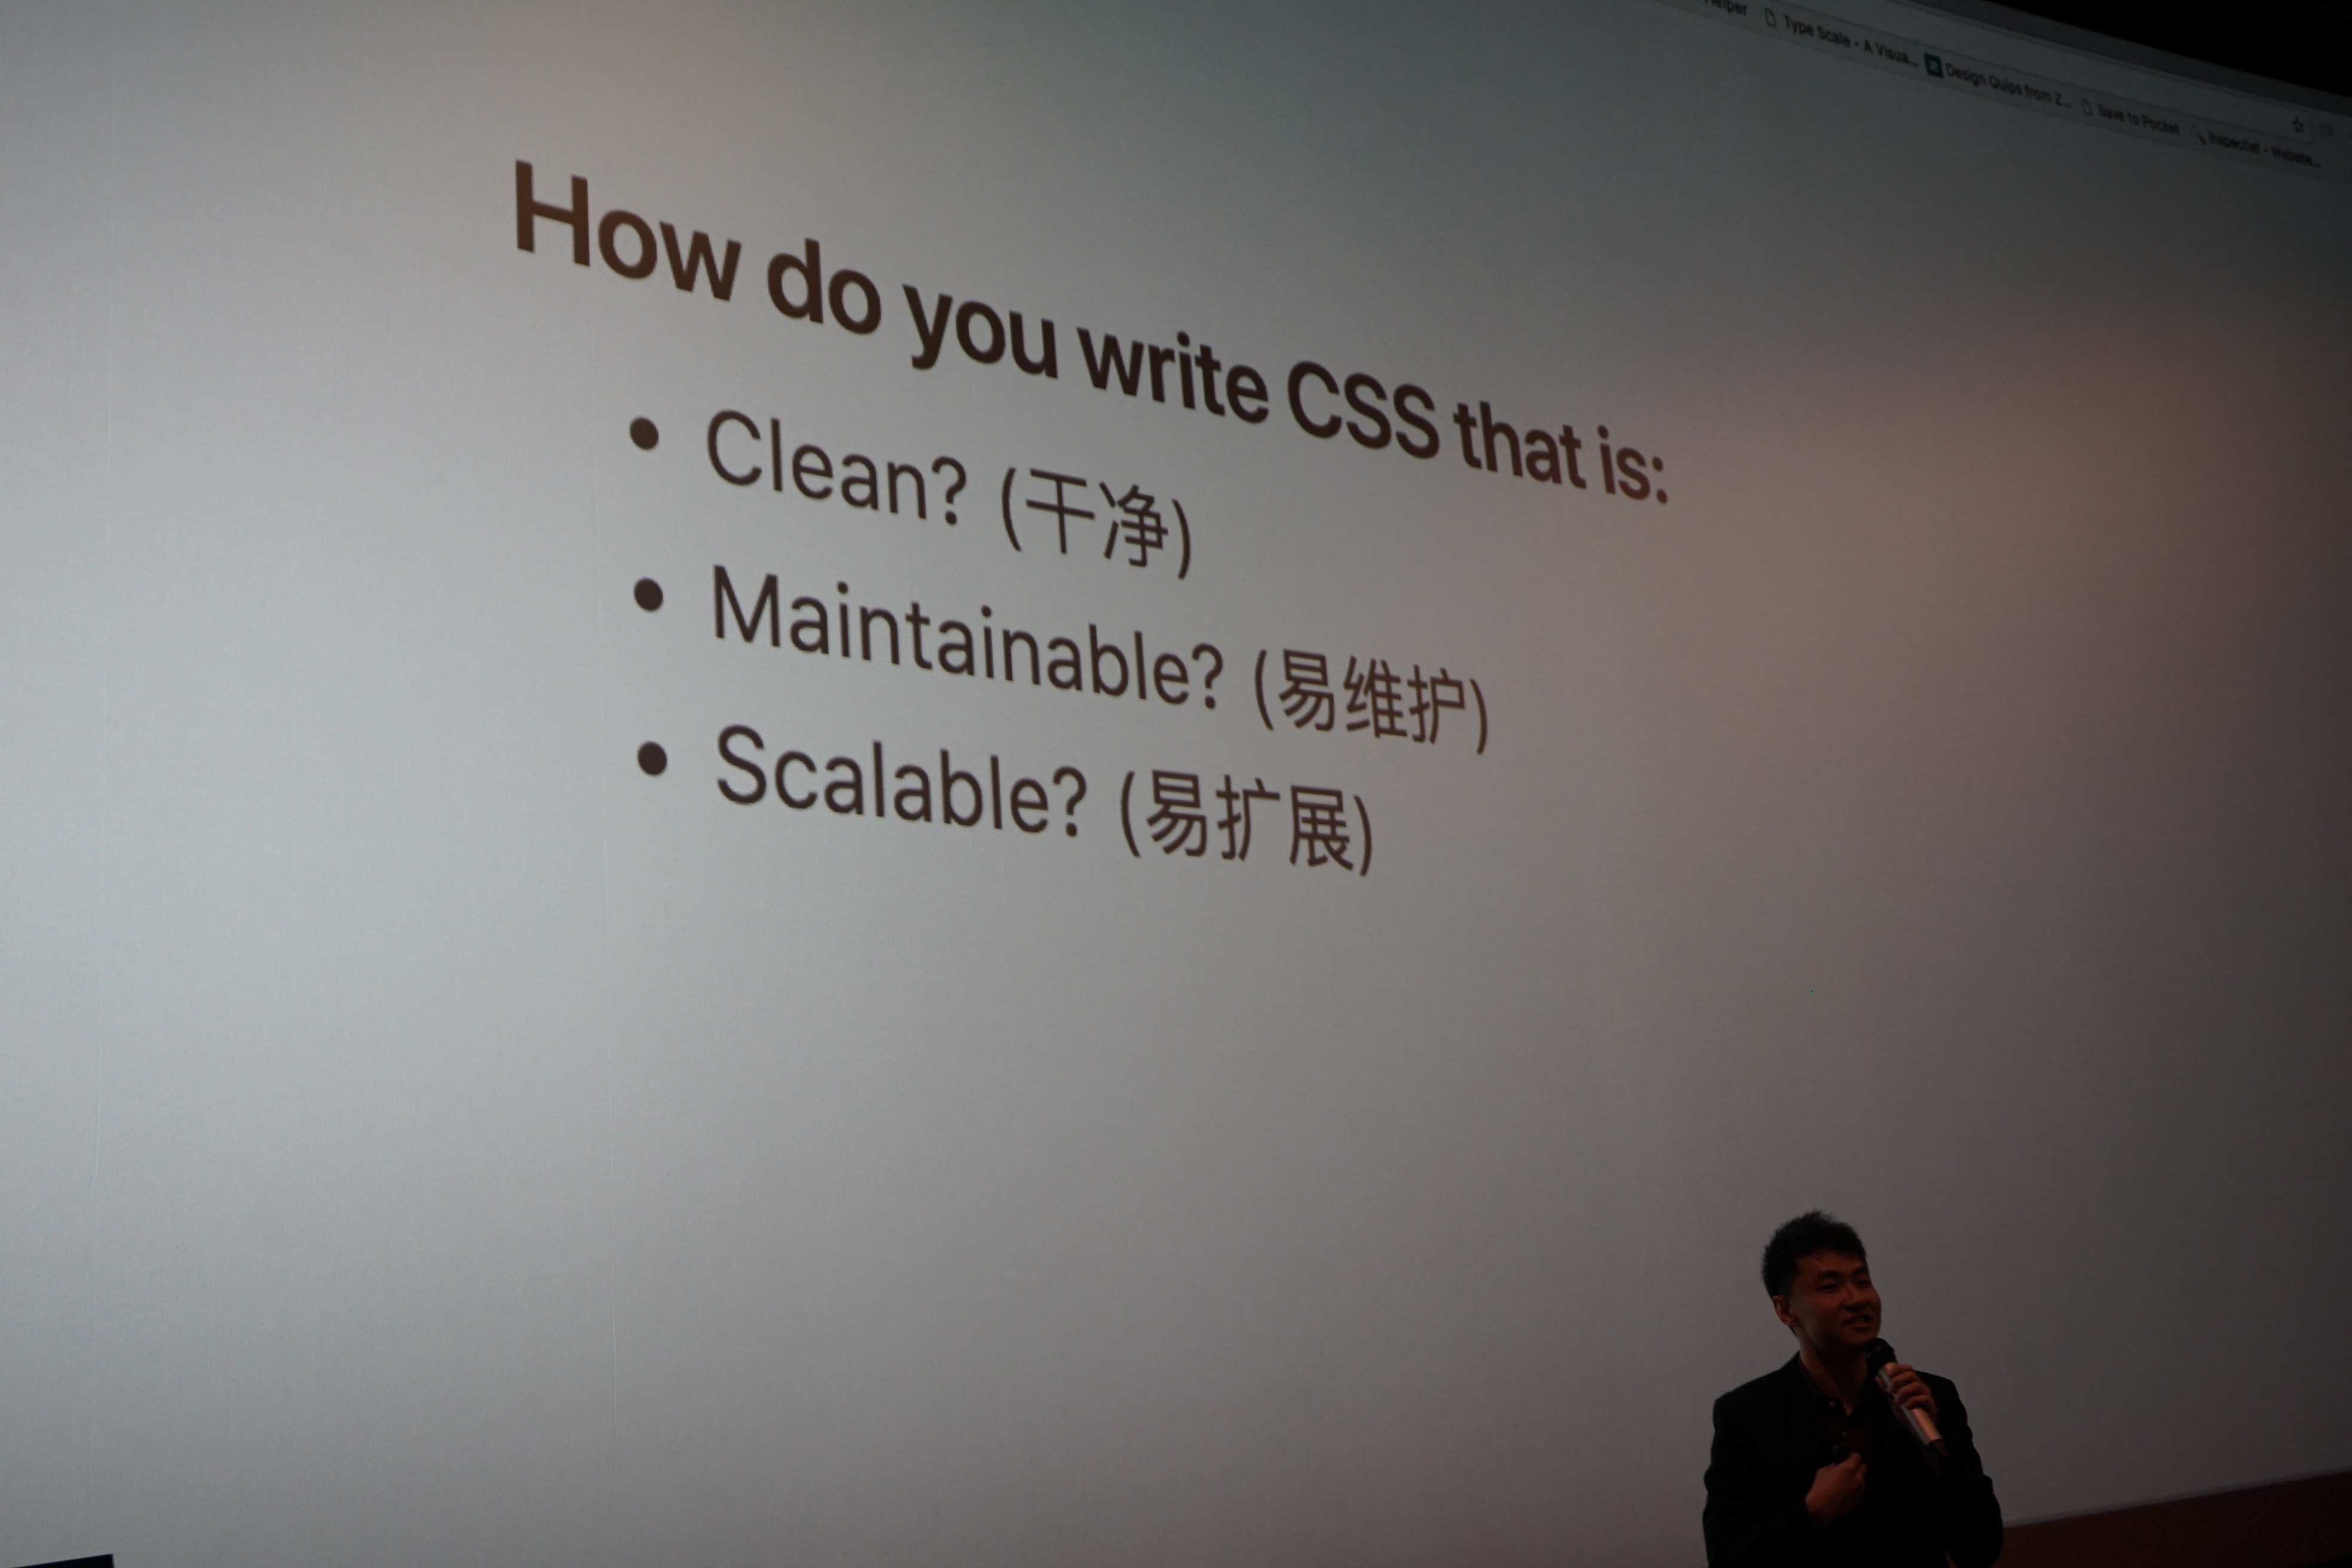 Slides contain both english and chinese words